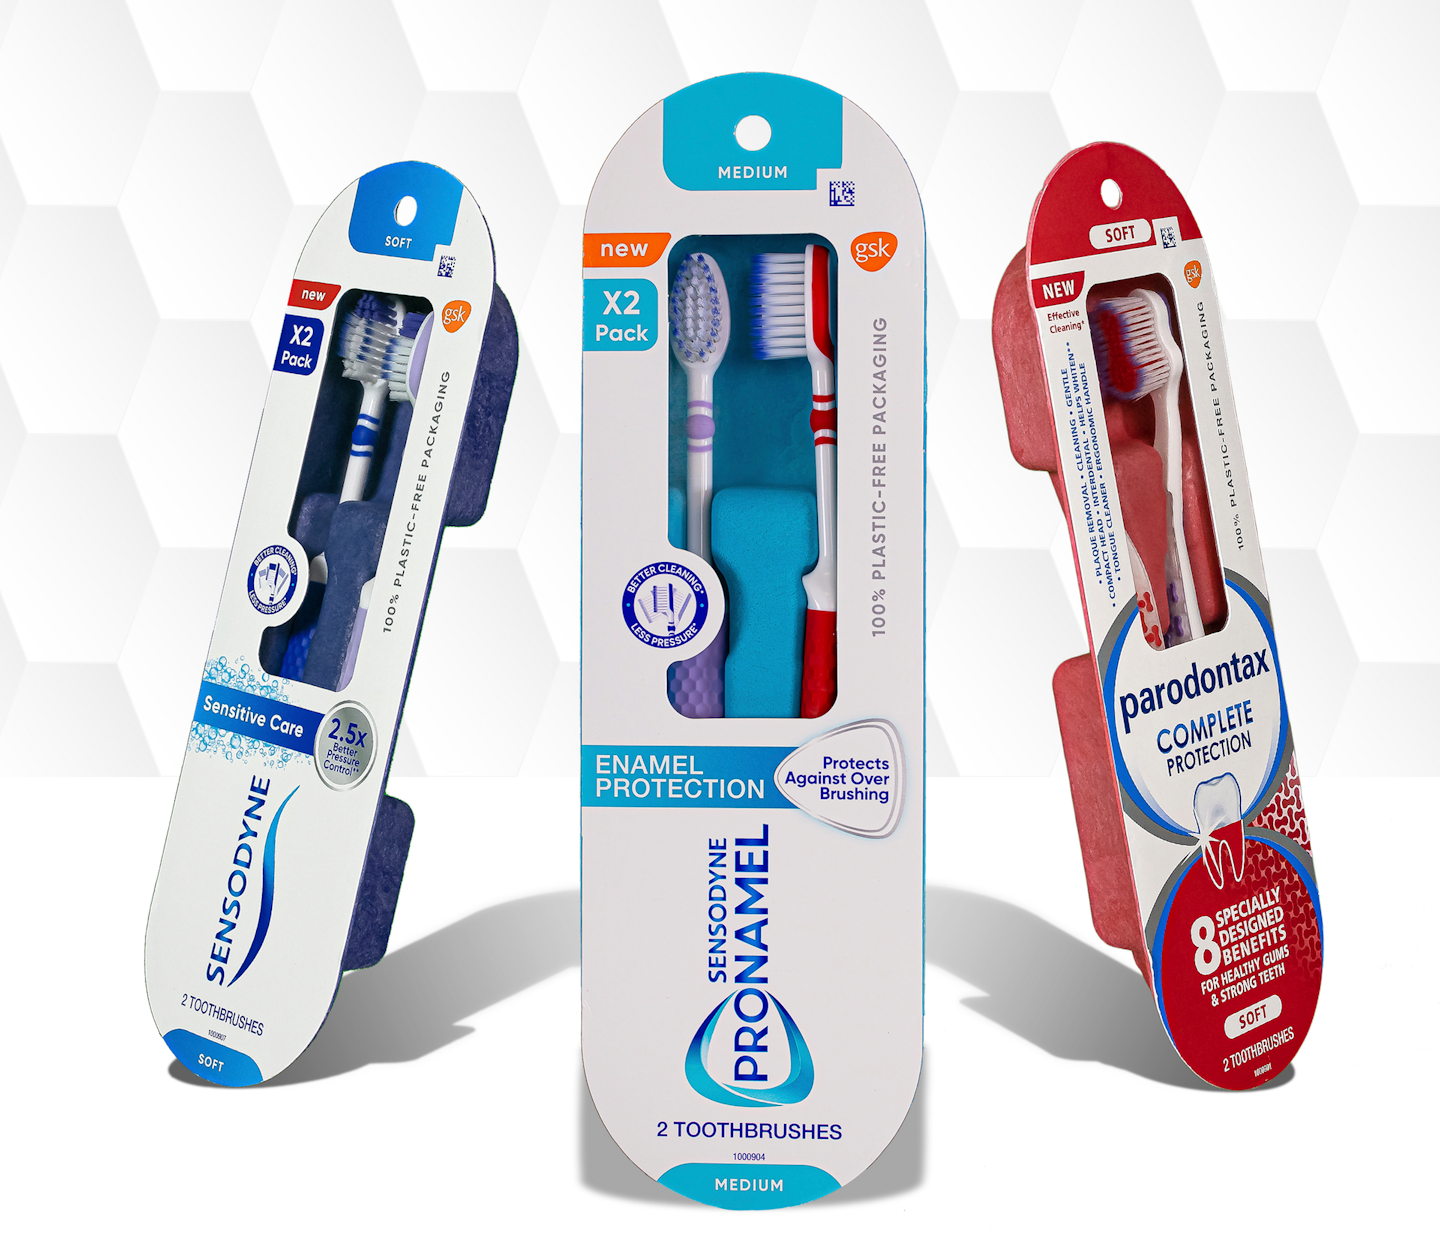 Sustainable Packaging, Health & Beauty Awards â€” Launch of GSK's 100% Plastic-Free, 100% Recyclable Secondary Packaging Toothbrush, by GlaxoSmithKline Consumer Healthcare.